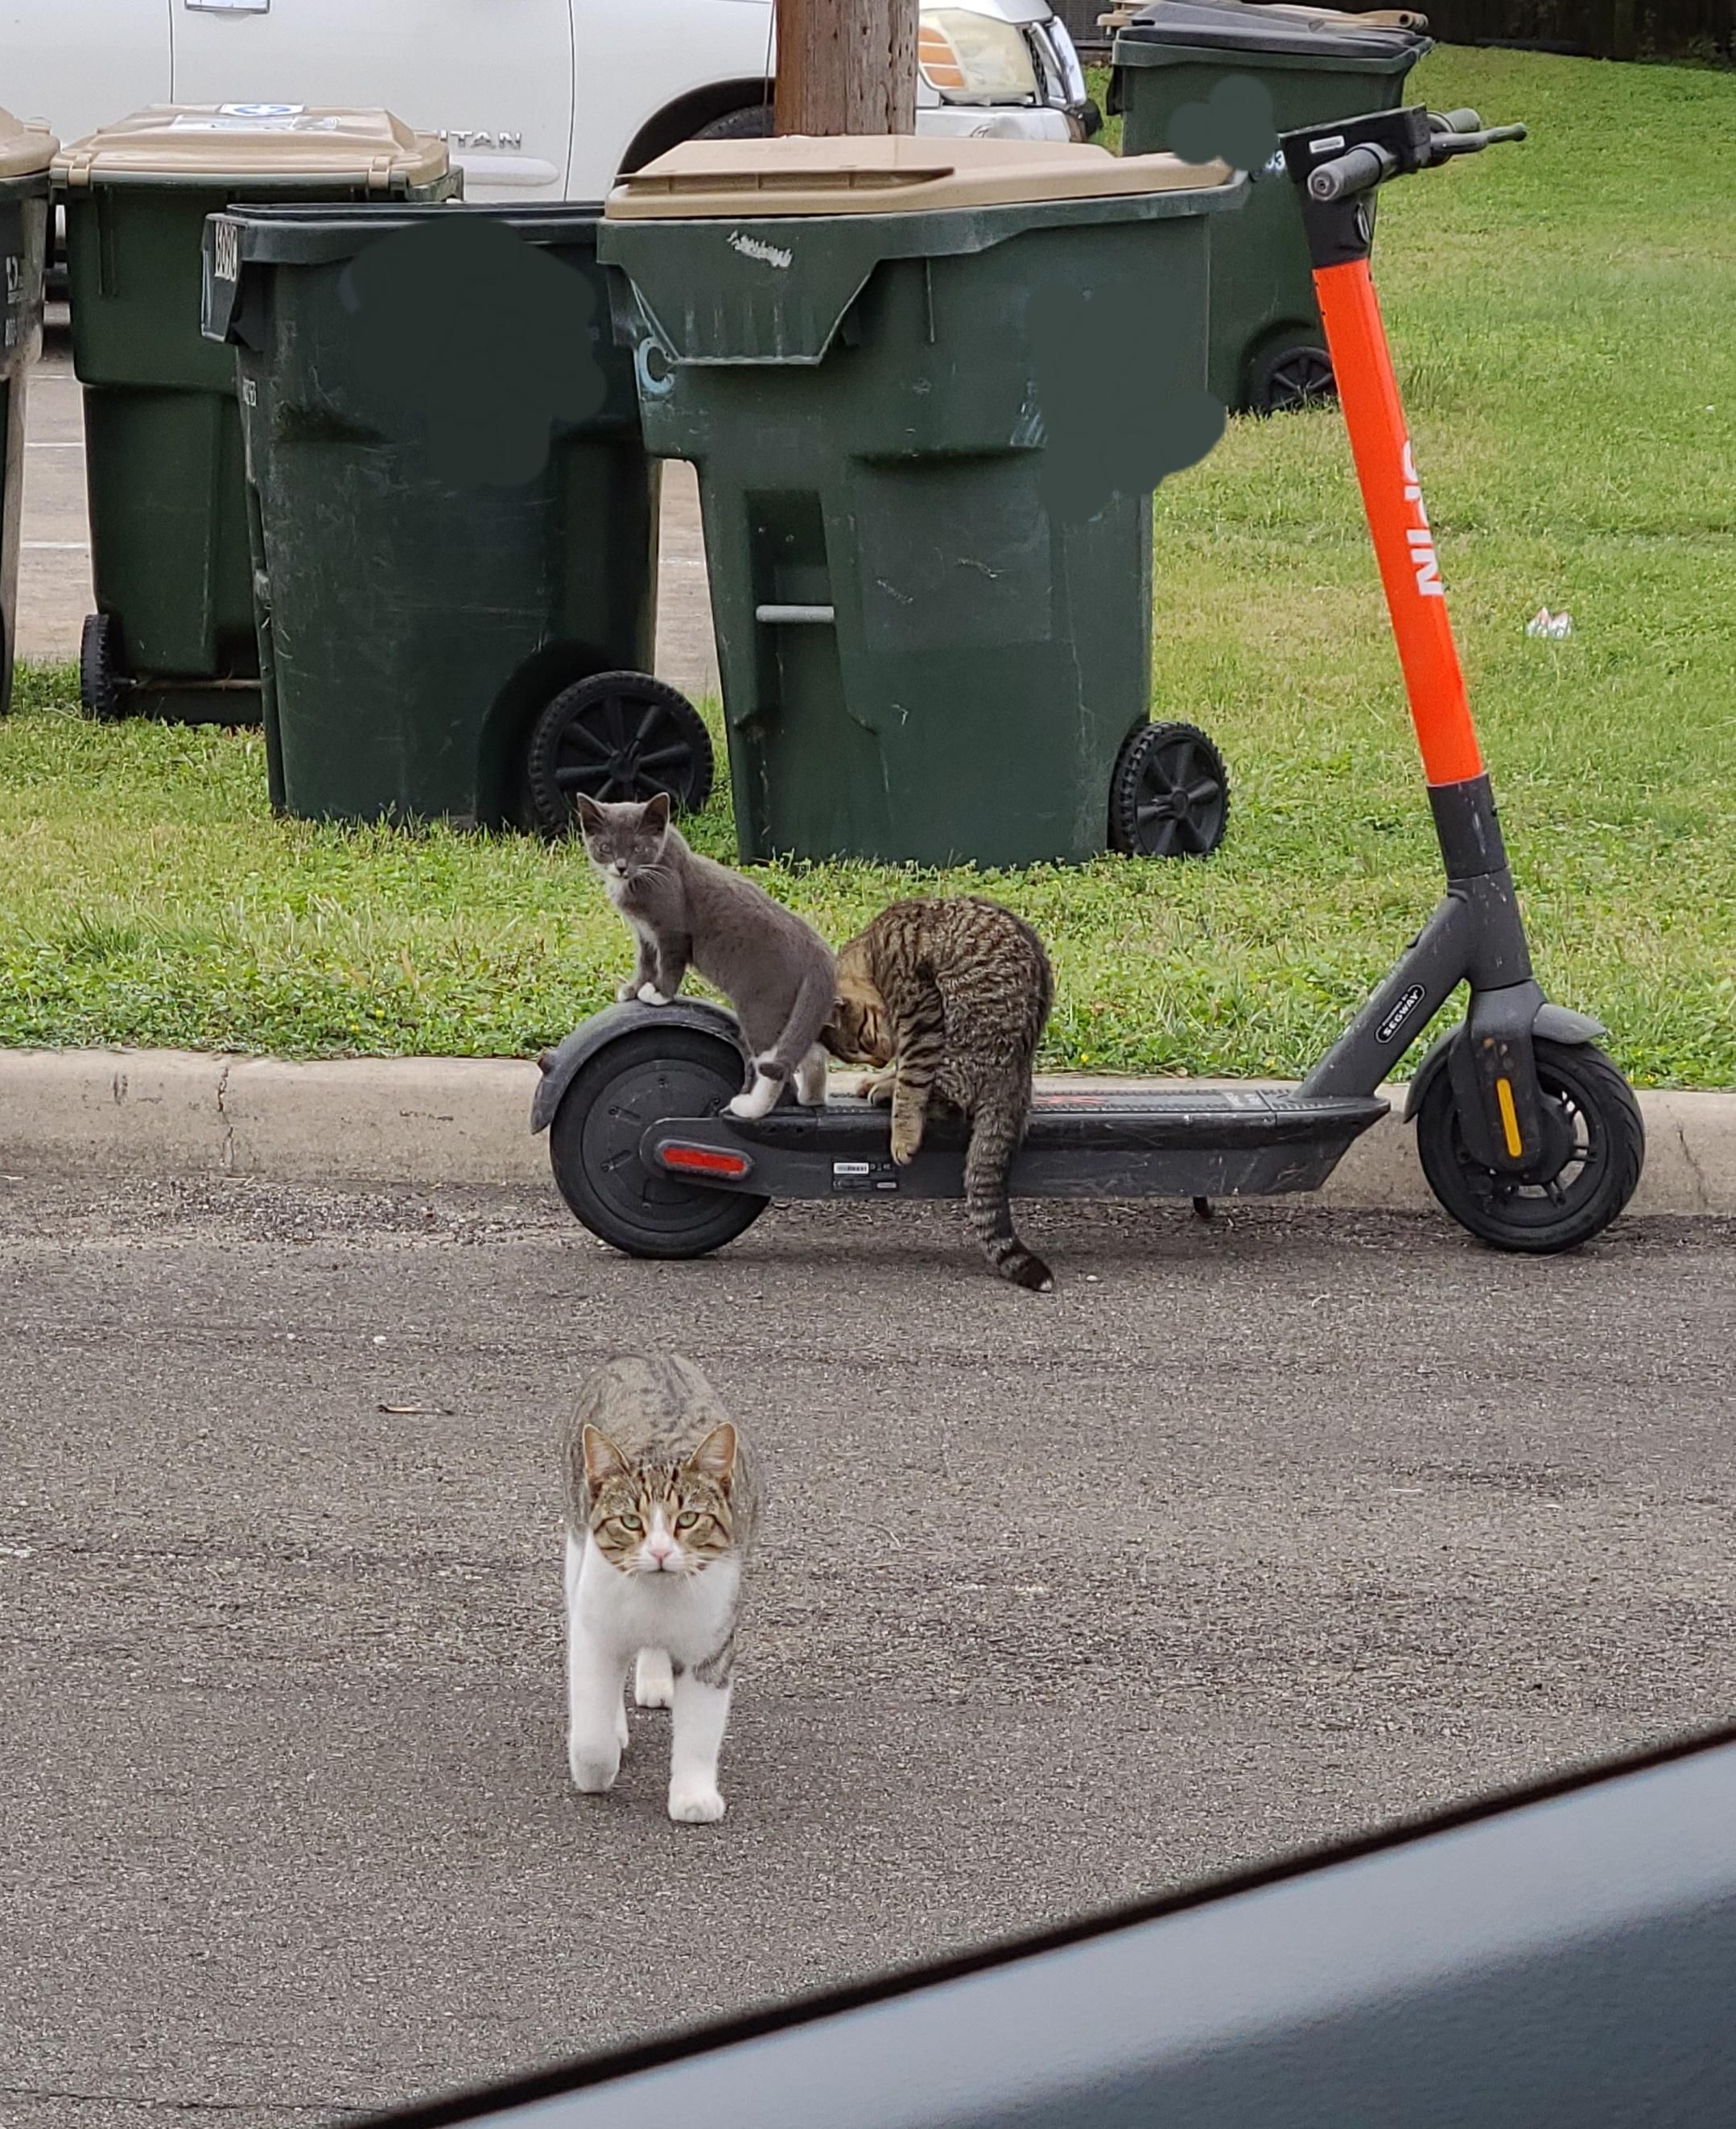 Since y'all helped me get the scooter from Cujo yesterday, maybe y'all can help me retrieve this one from a local gang of Khajiits. They keep asking if I have coin? Please send help.